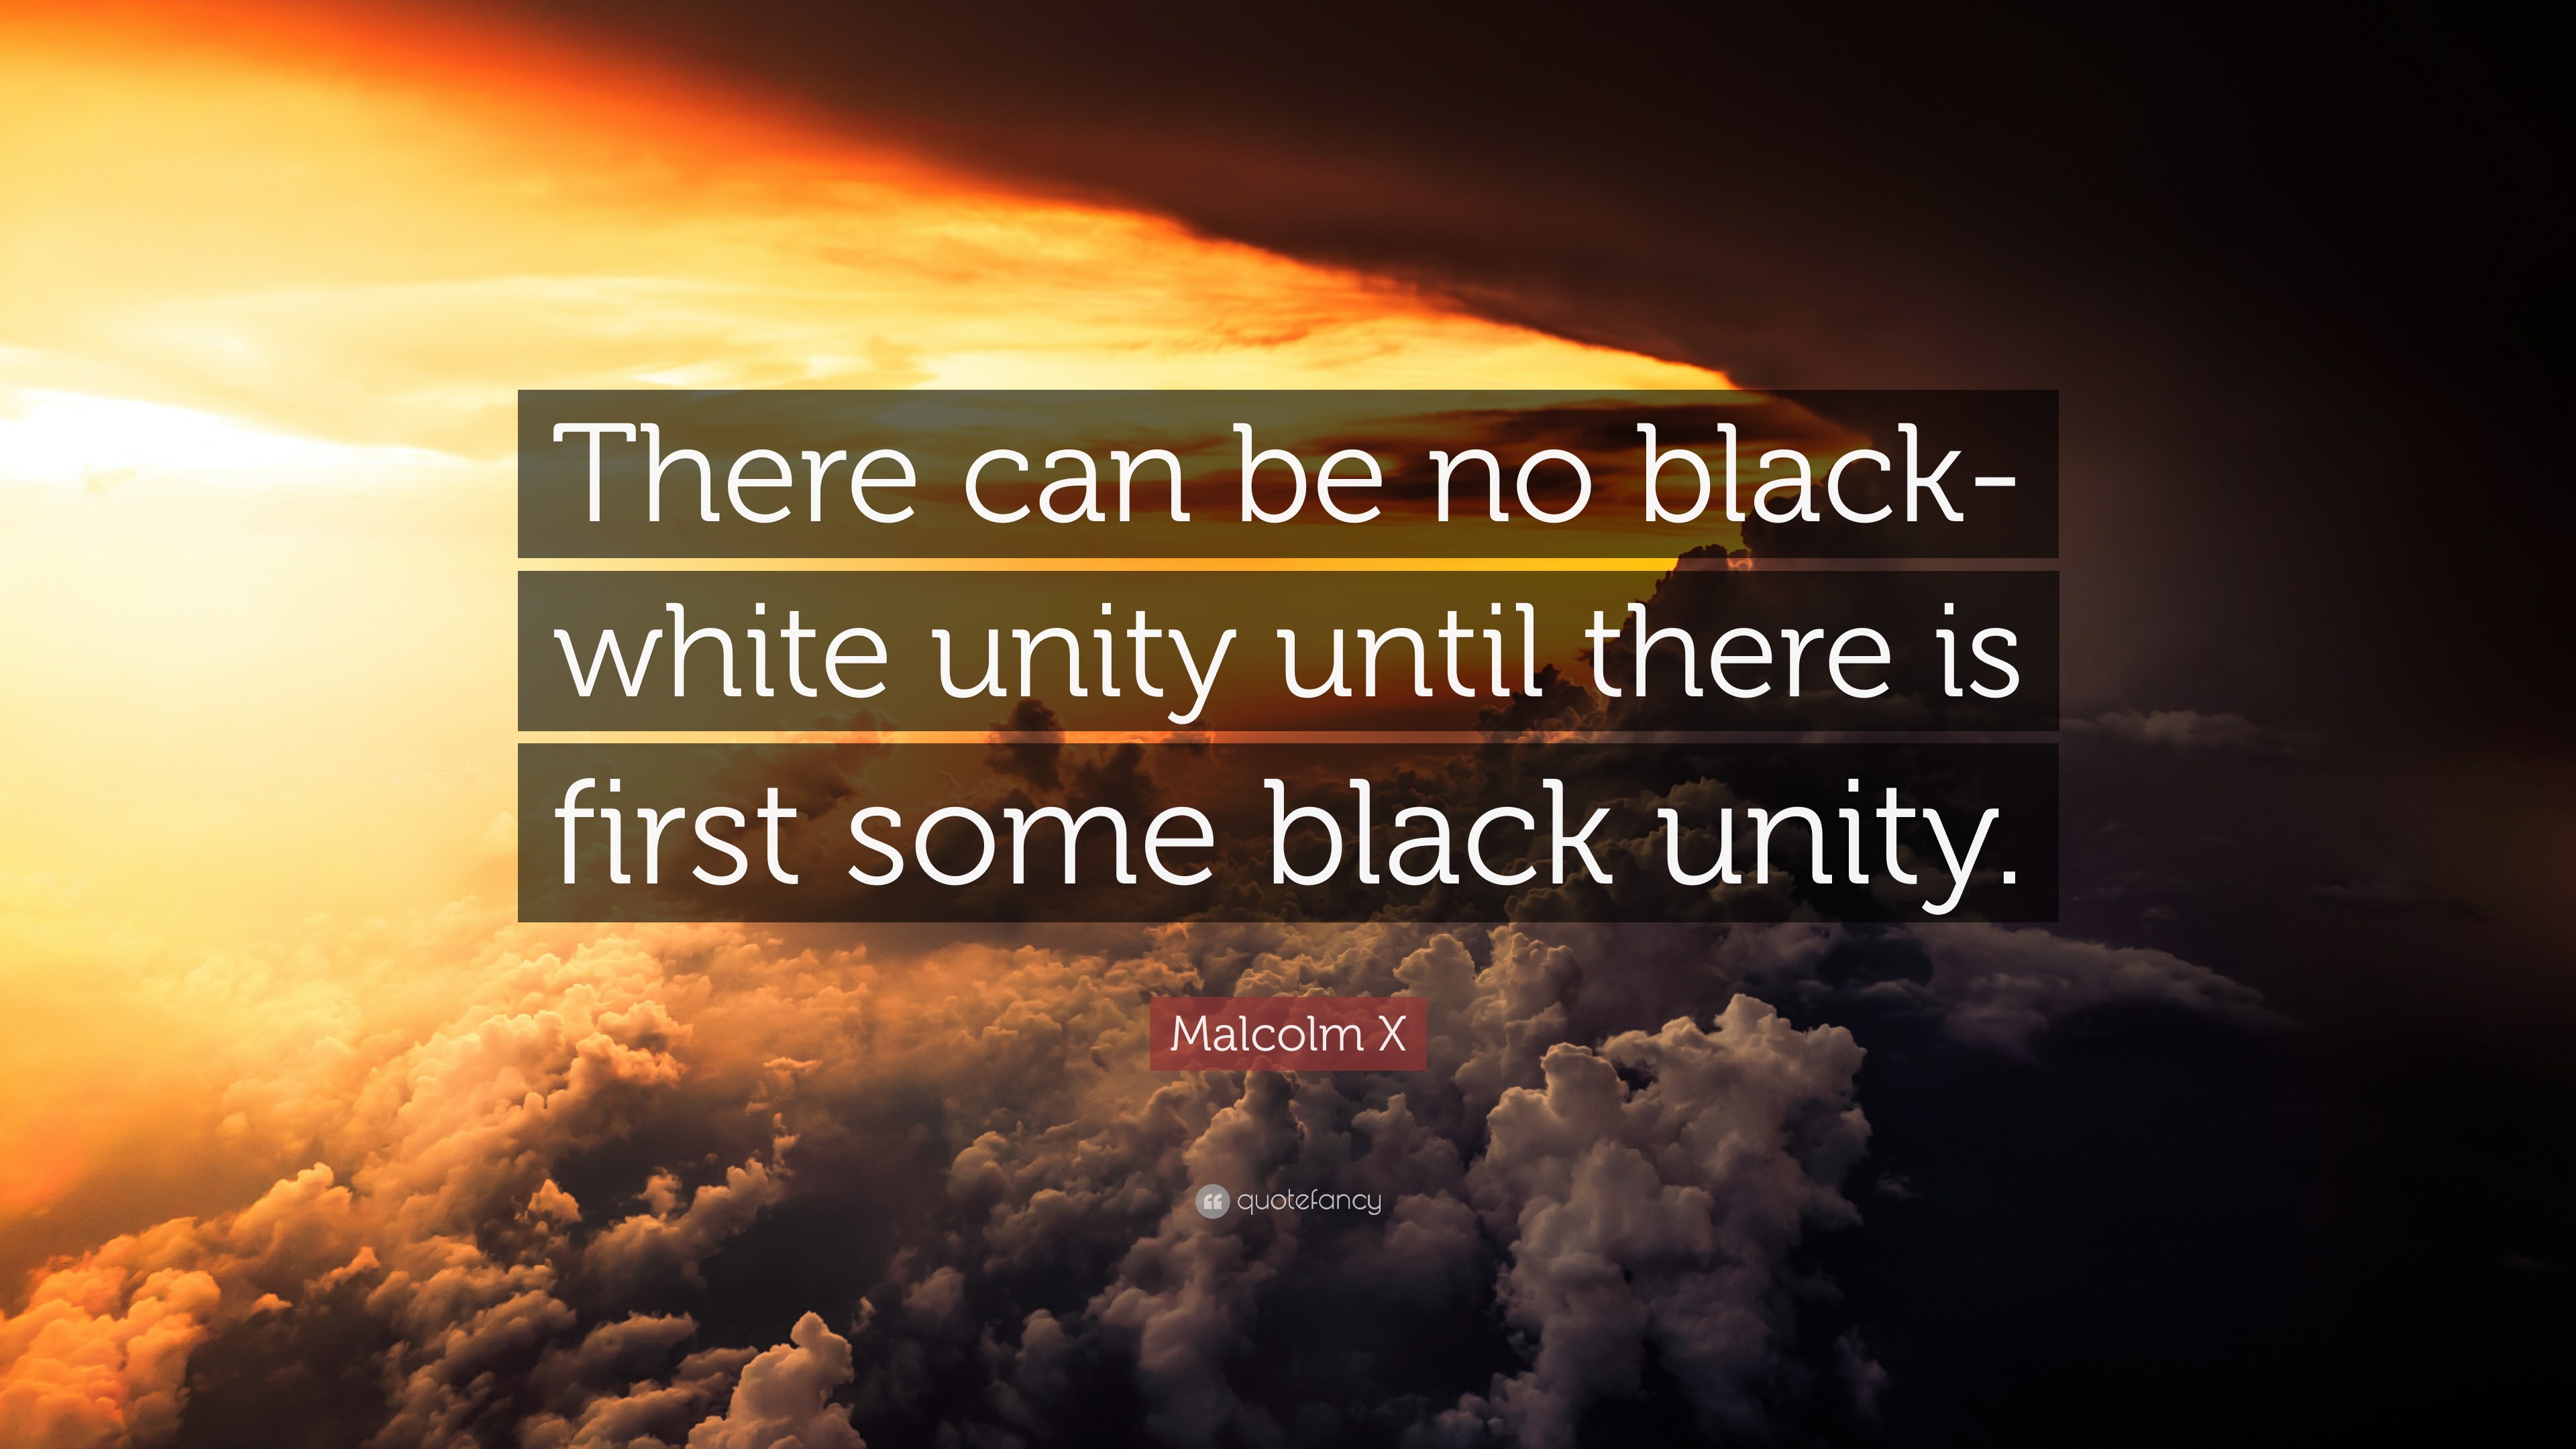 famous unity quotes